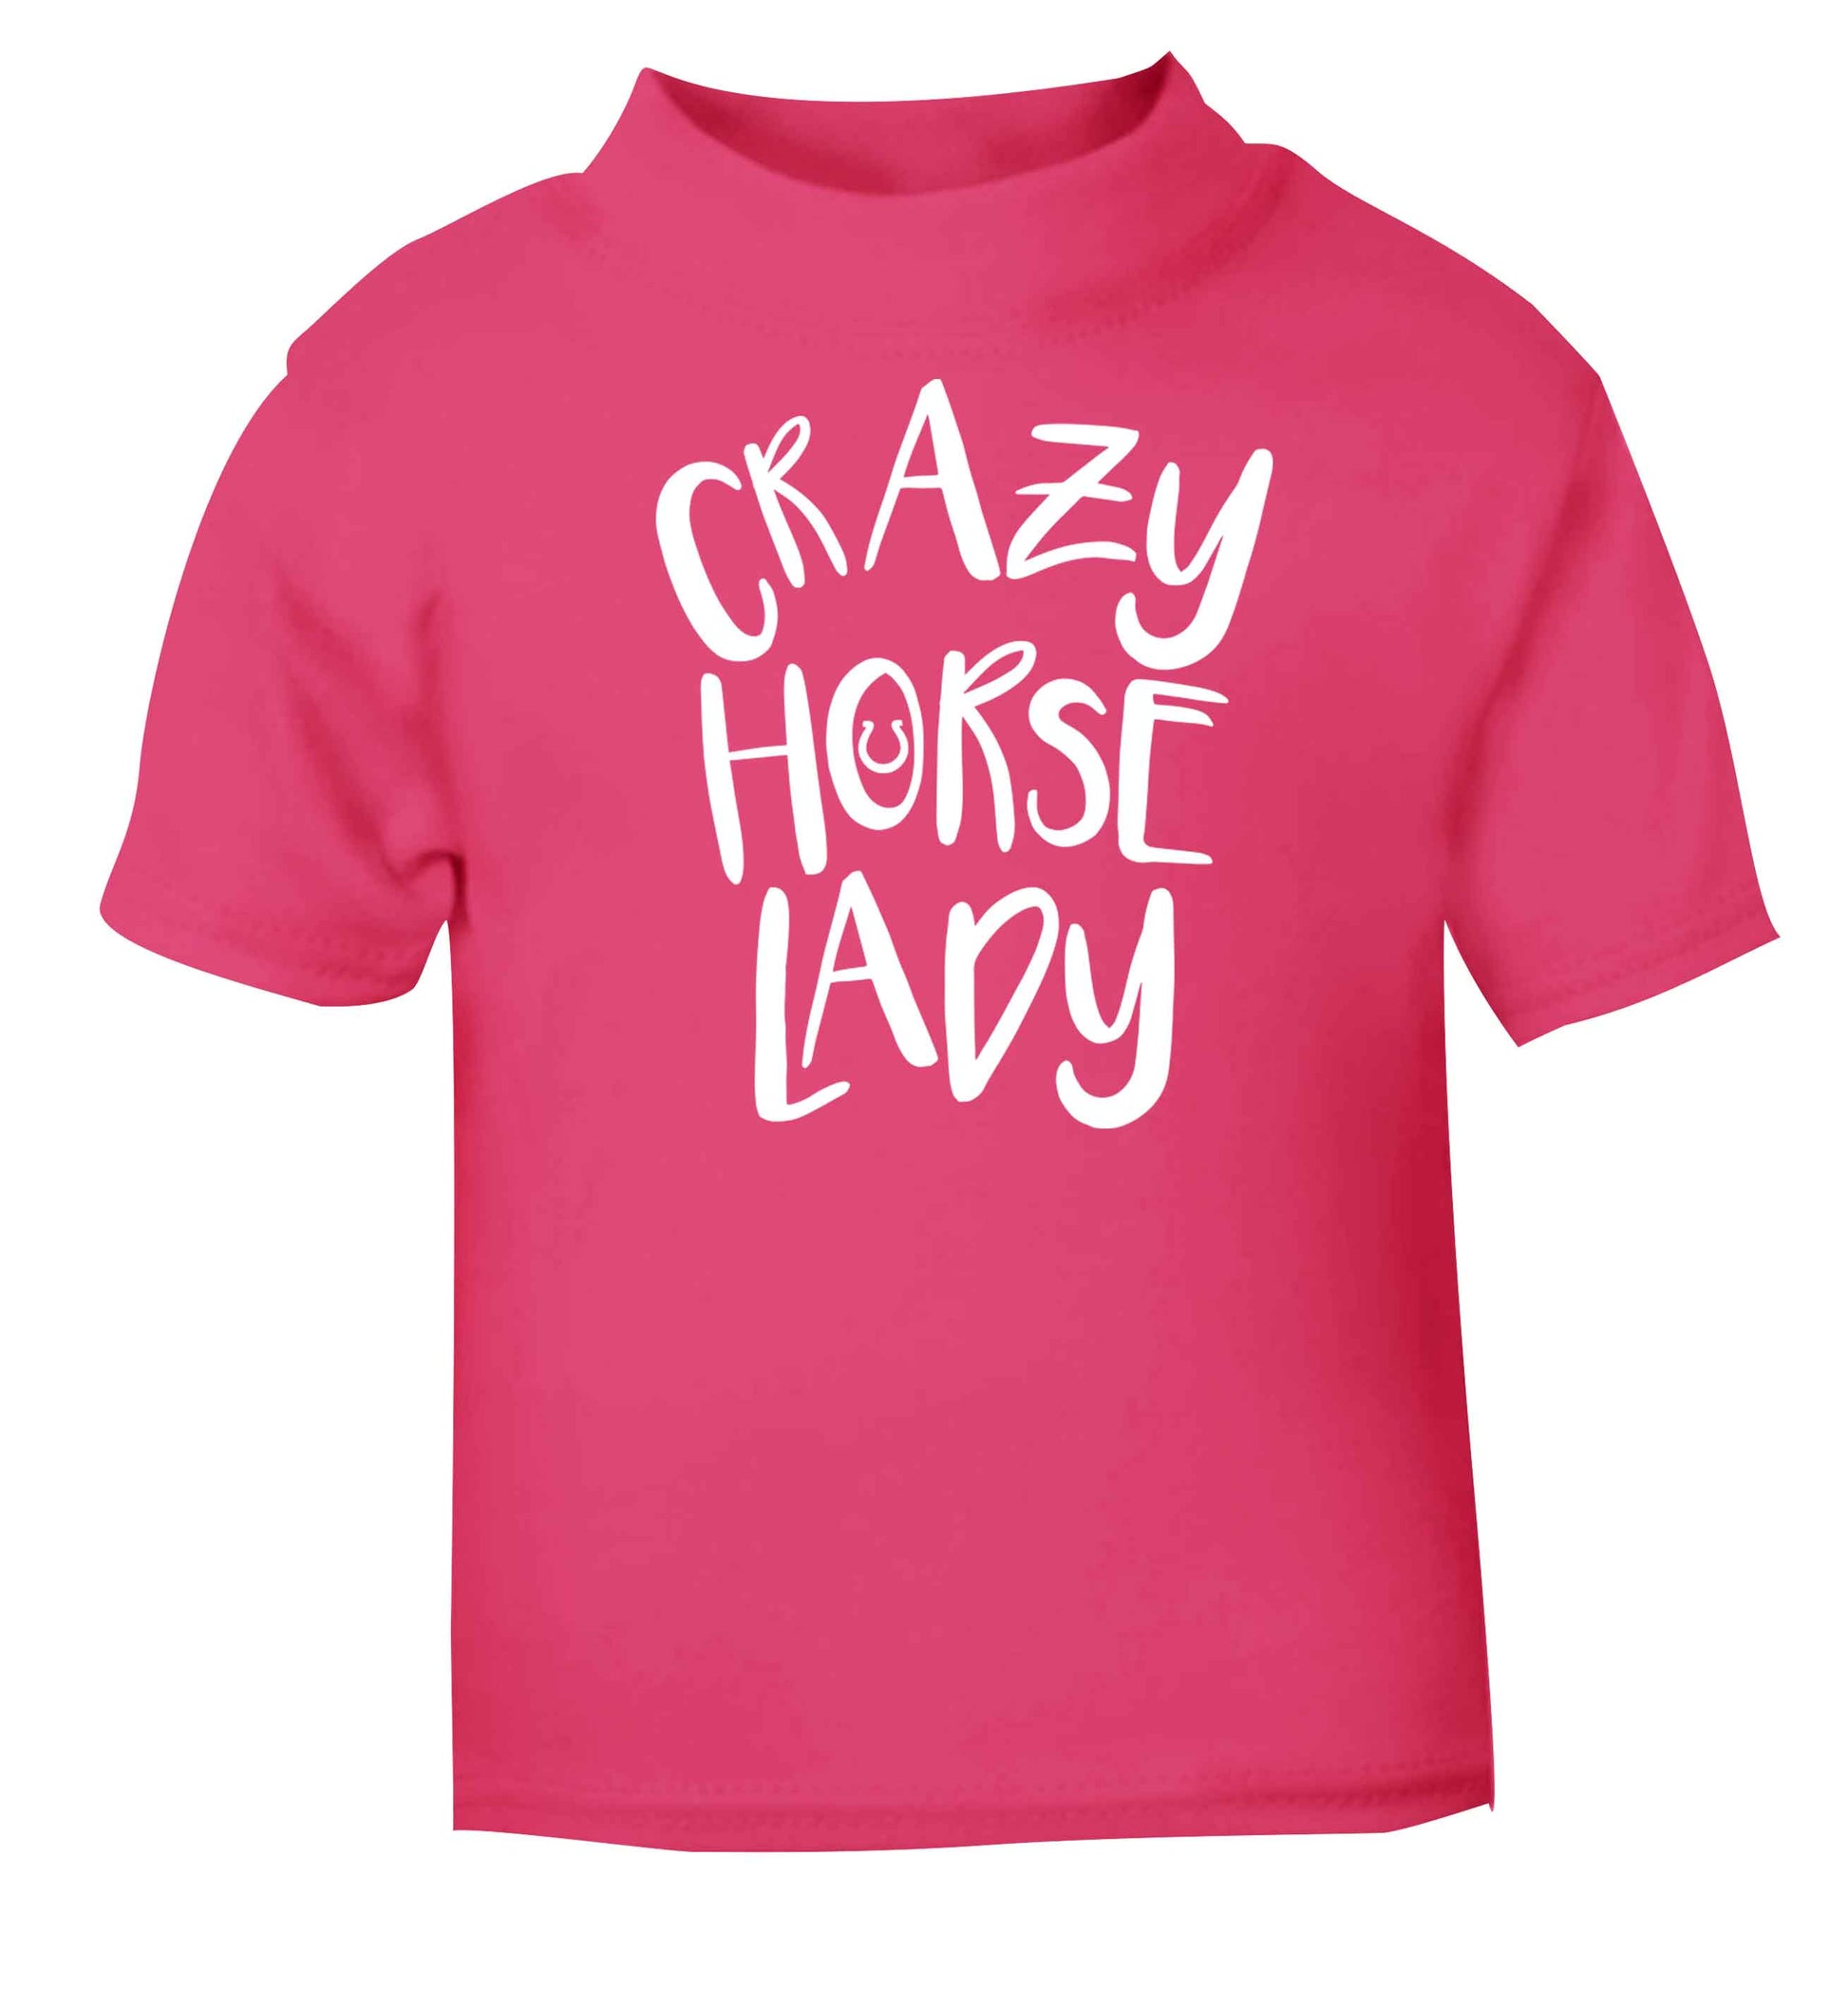 Crazy horse lady pink baby toddler Tshirt 2 Years